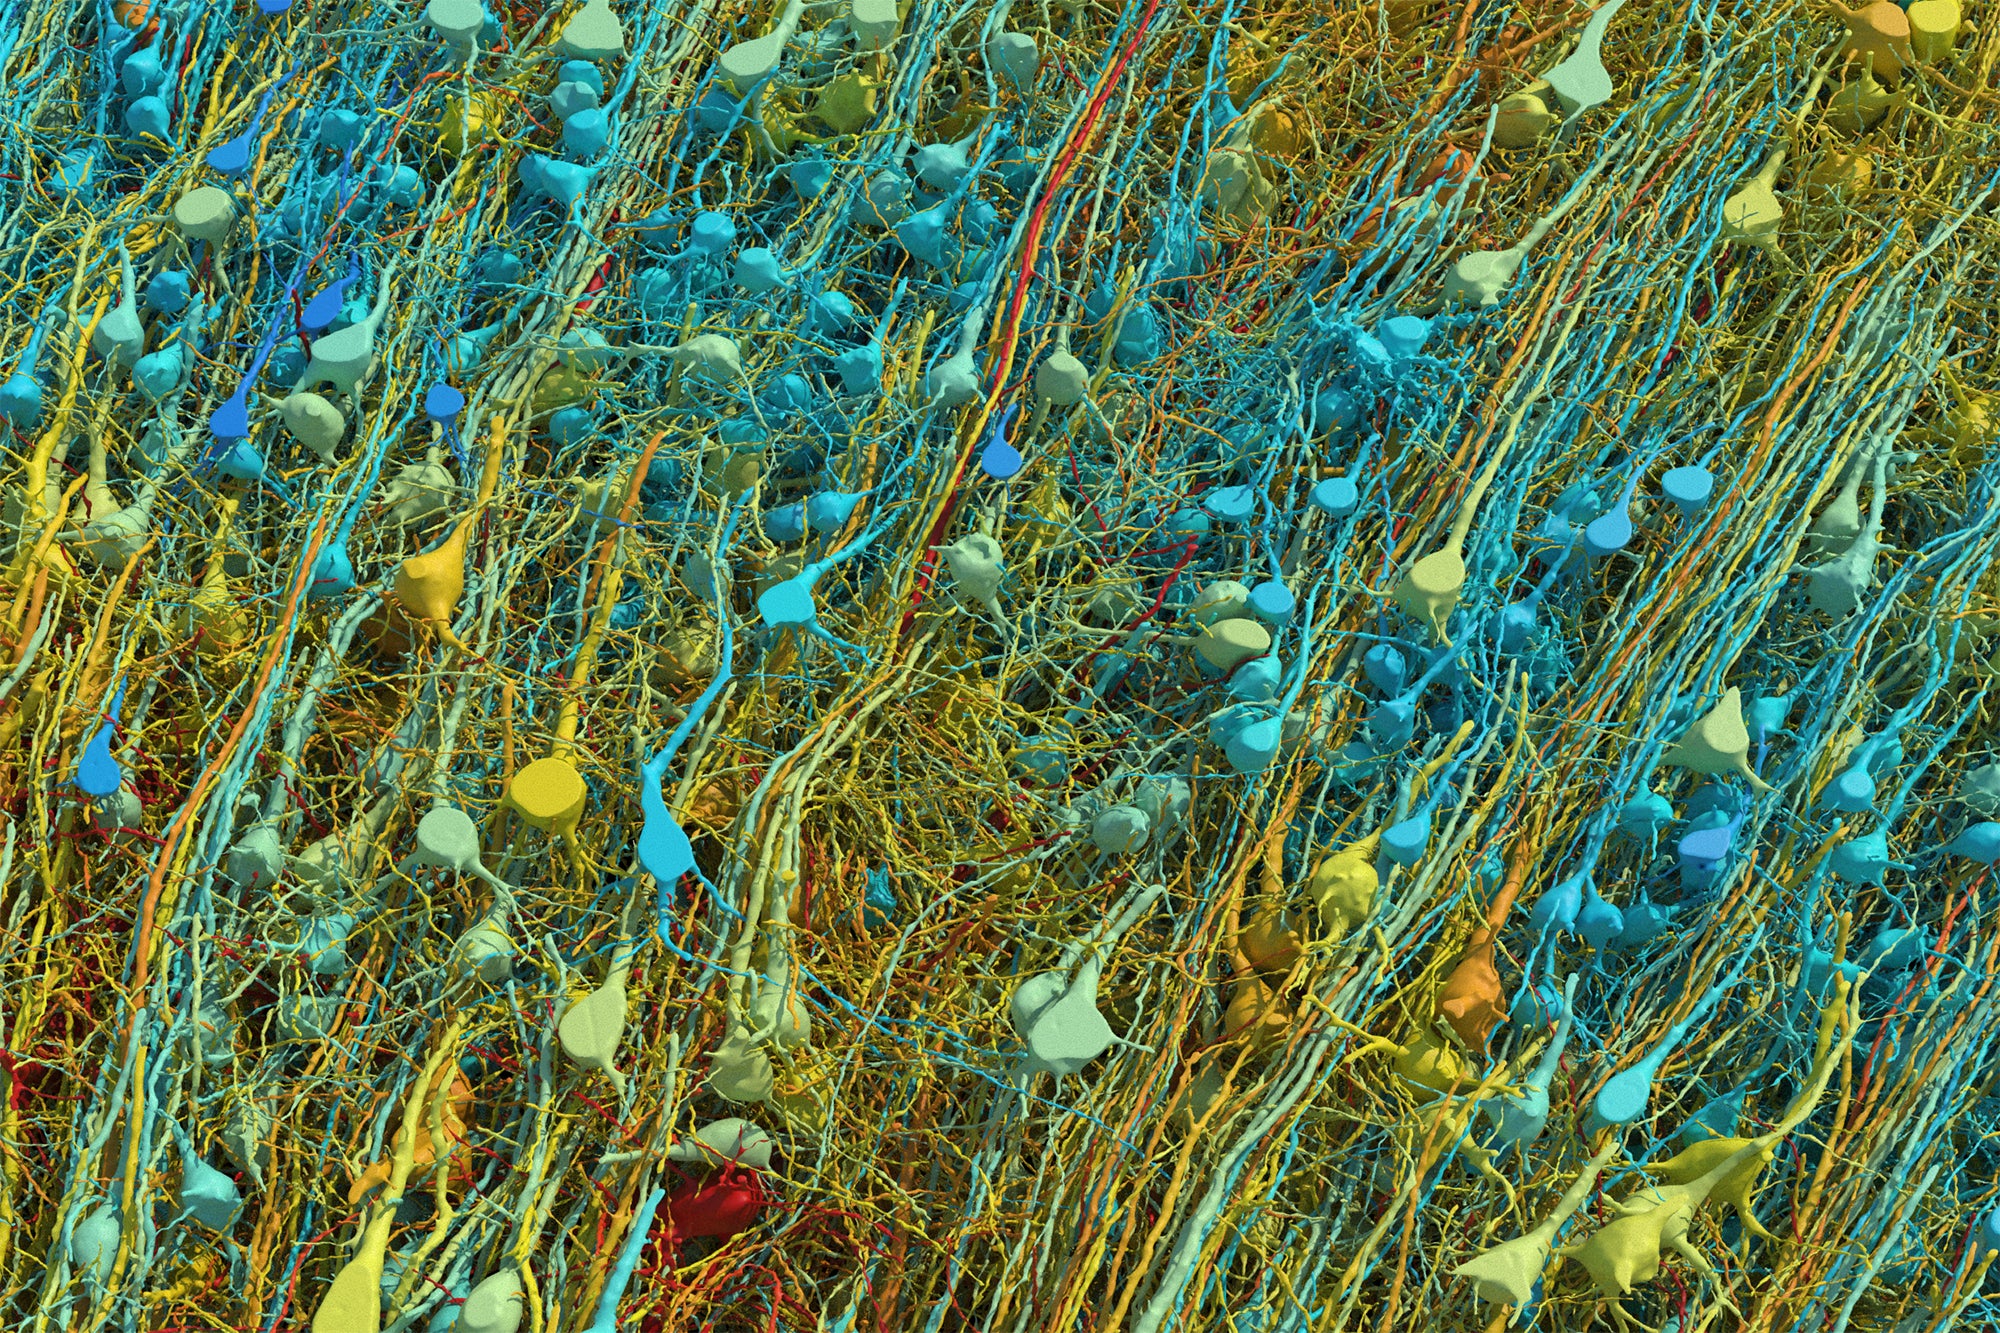 Close up view of excitatory neurons colored by size